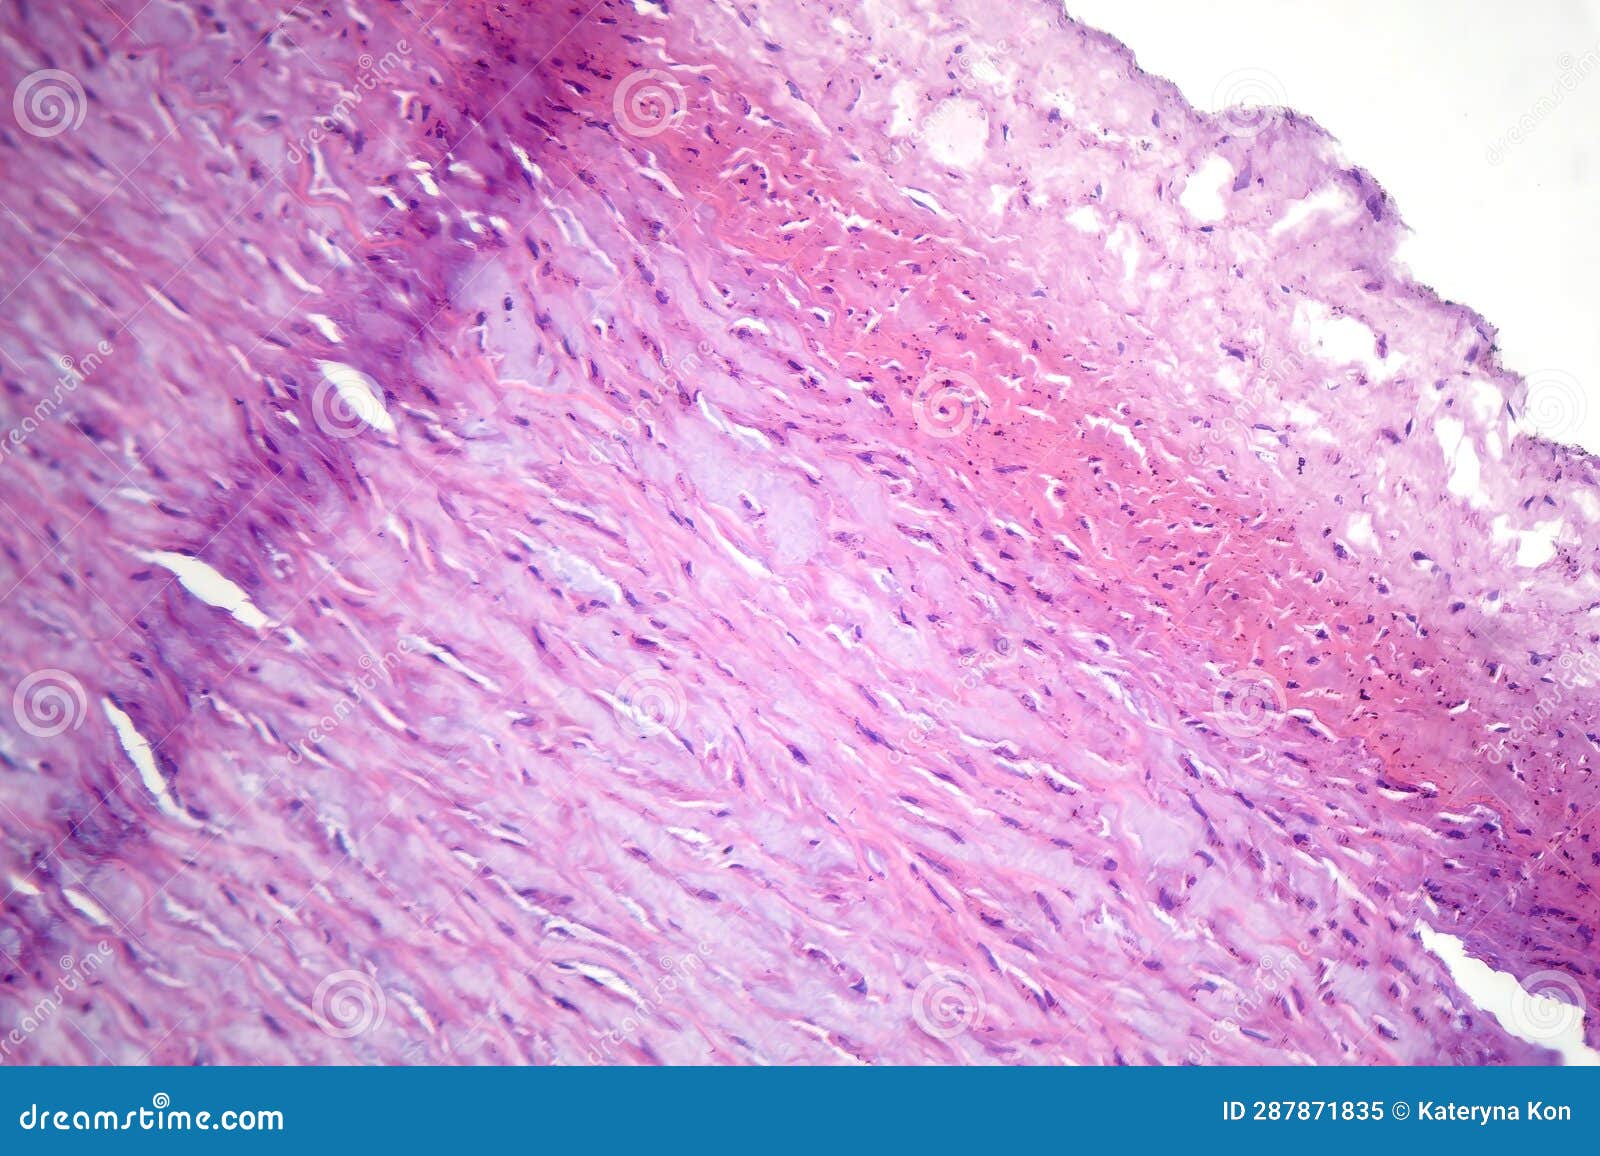 Fibrinoid Necrosis in a Vessel Wall, Light Micrograph Stock Image ...